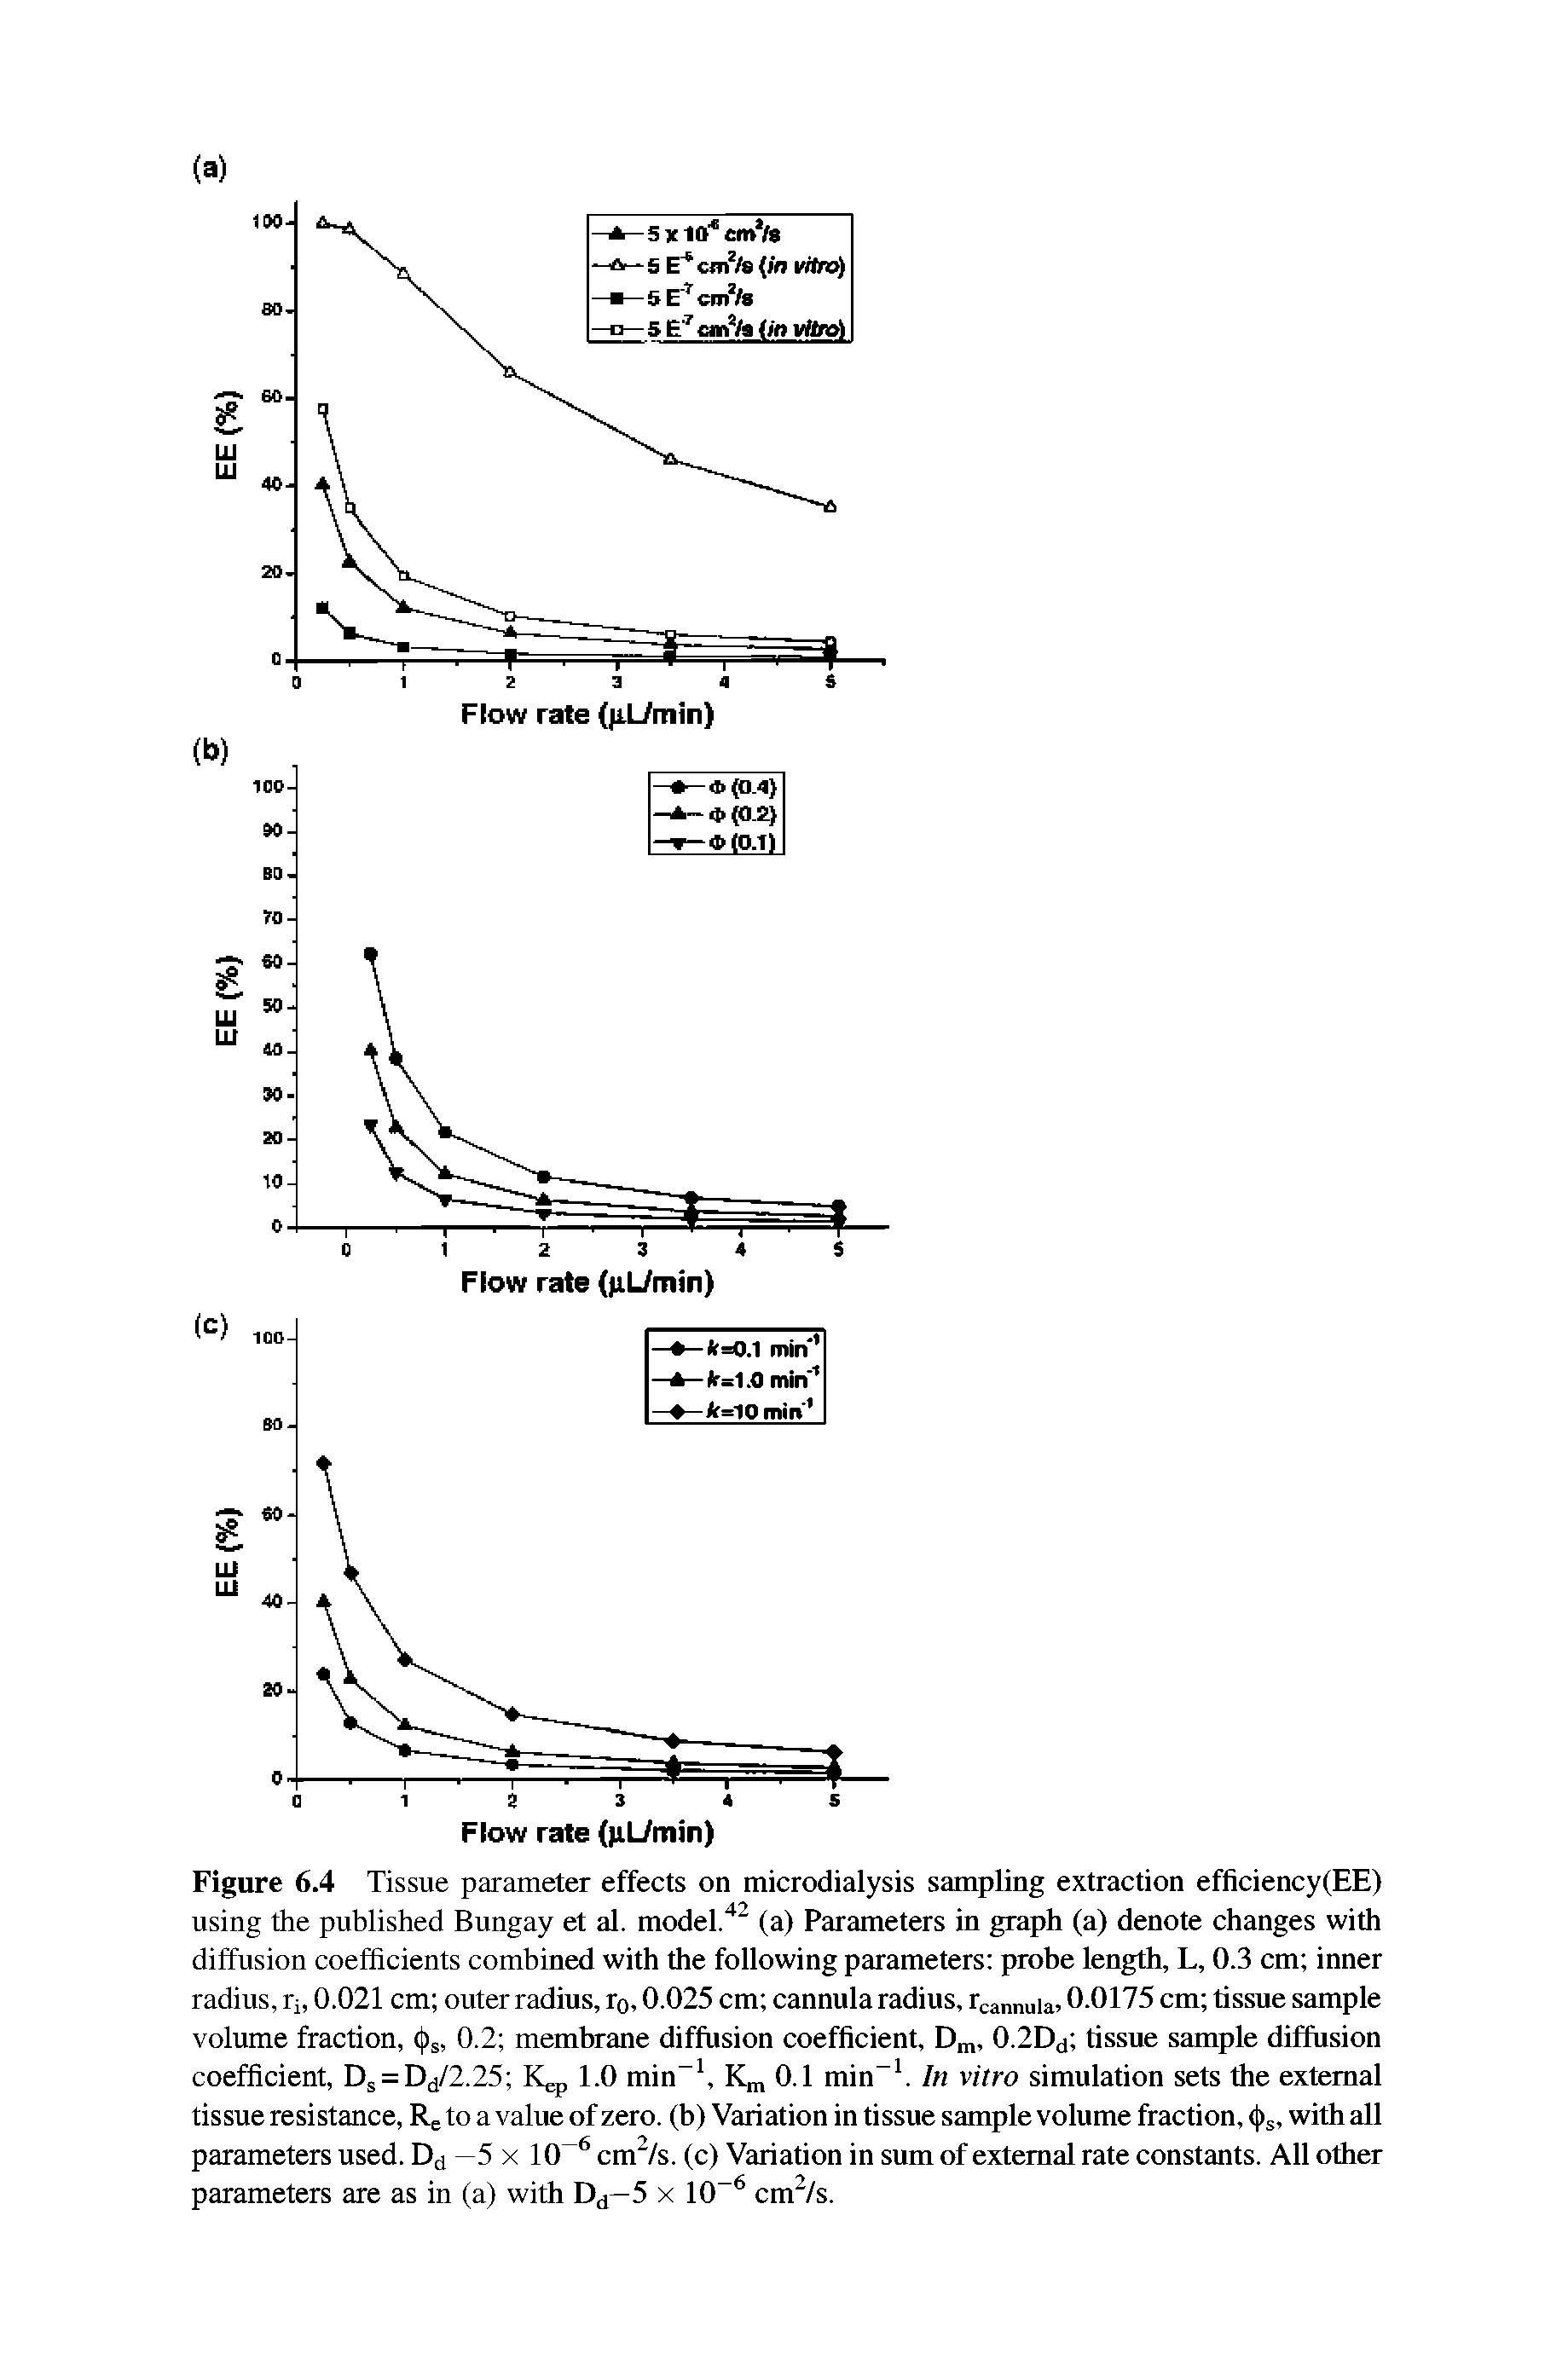 Figure 6.4 Tissue parameter effects on microdialysis sampling extraction efficiency(EE) using the published Bungay et al. model.42 (a) Parameters in graph (a) denote changes with diffusion coefficients combined with the following parameters probe length, L, 0.3 cm inner radius, ri 0.021 cm outer radius, r0,0.025 cm cannula radius, rcannuia, 0.0175 cm tissue sample volume fraction, ( )s, 0.2 membrane diffusion coefficient, Dm, 0.2Dd tissue sample diffusion coefficient, Ds = Dd/2.25 K,.p 1.0 min-1, Km 0.1 min-1. In vitro simulation sets the external tissue resistance, Rc to a value of zero, (b) Variation in tissue sample volume fraction, <(is, with all parameters used. Dd —5 x 10 6 cm2/s. (c) Variation in sum of external rate constants. All other parameters are as in (a) with Dd— 5 x 10-6 cm2/s.